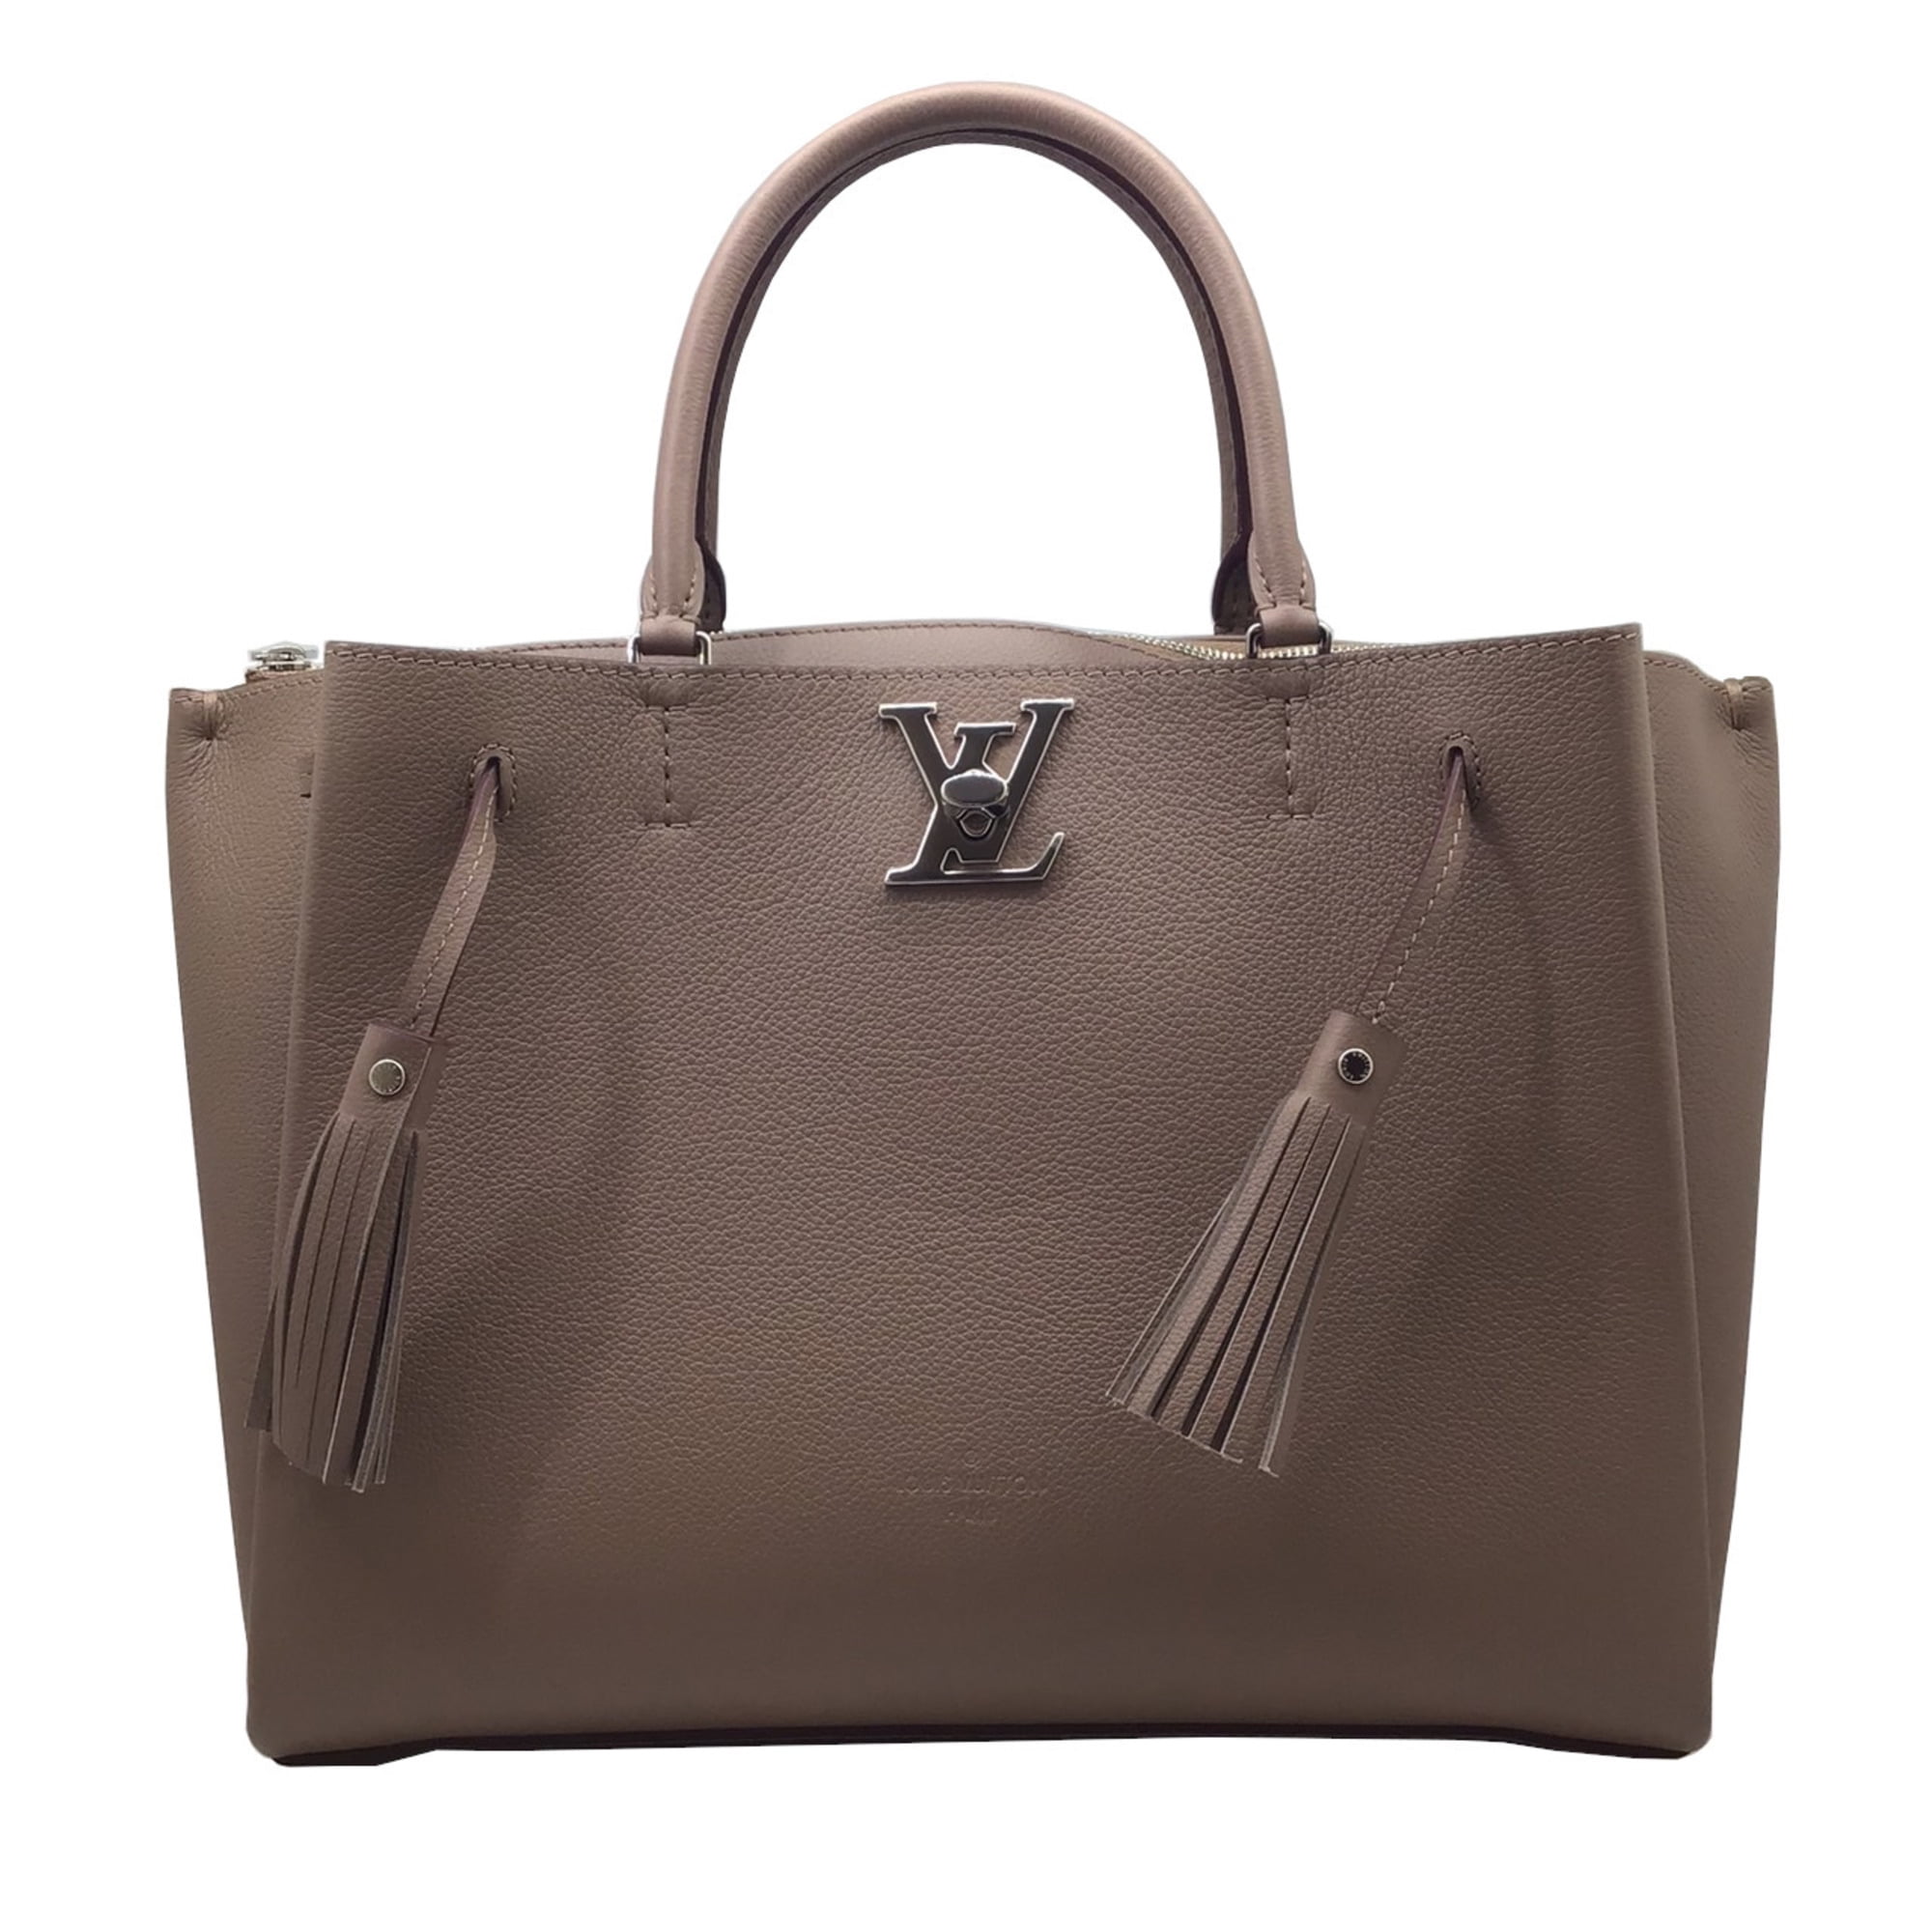 Authenticated Used LOUIS VUITTON Louis Vuitton Lock Me Tote Taupe Glace  2WAY Shoulder Bag Handbag Ladies Gift M54791 AR4147 